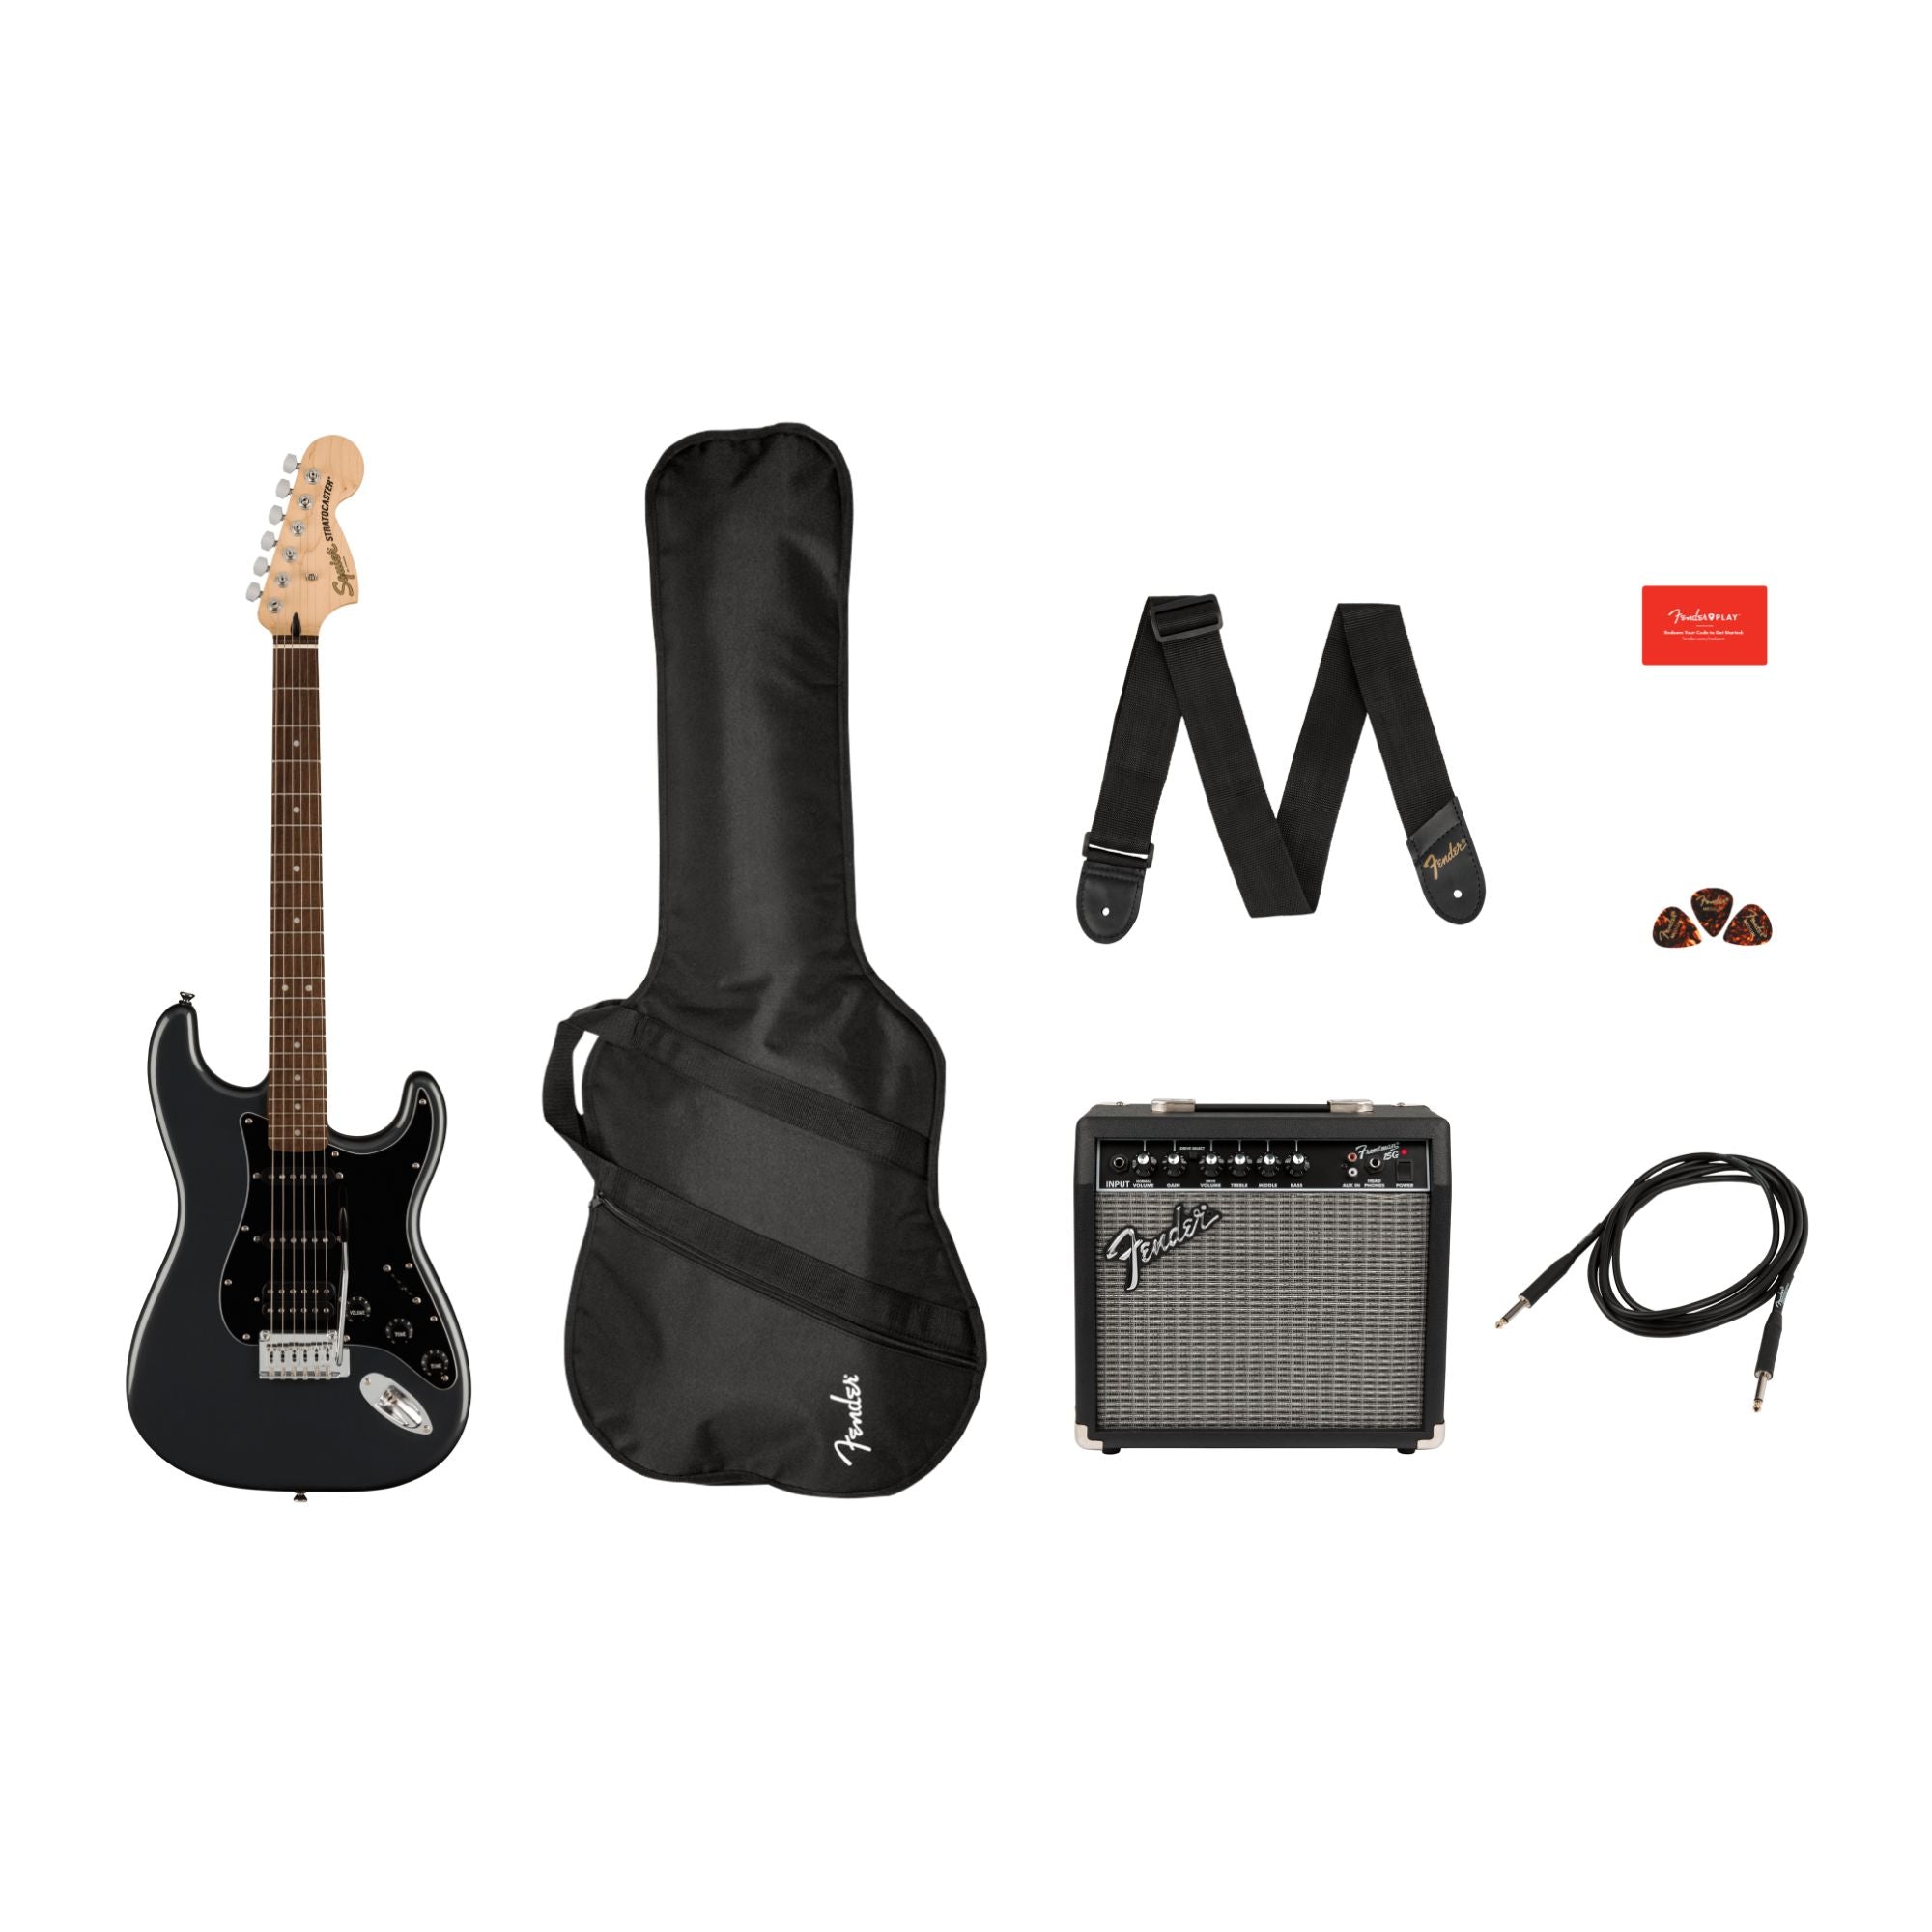 Squier Affinity Series Stratocaster HSS Electric Guitar Pack with Fender 15G Amp, Lead, Strap and more